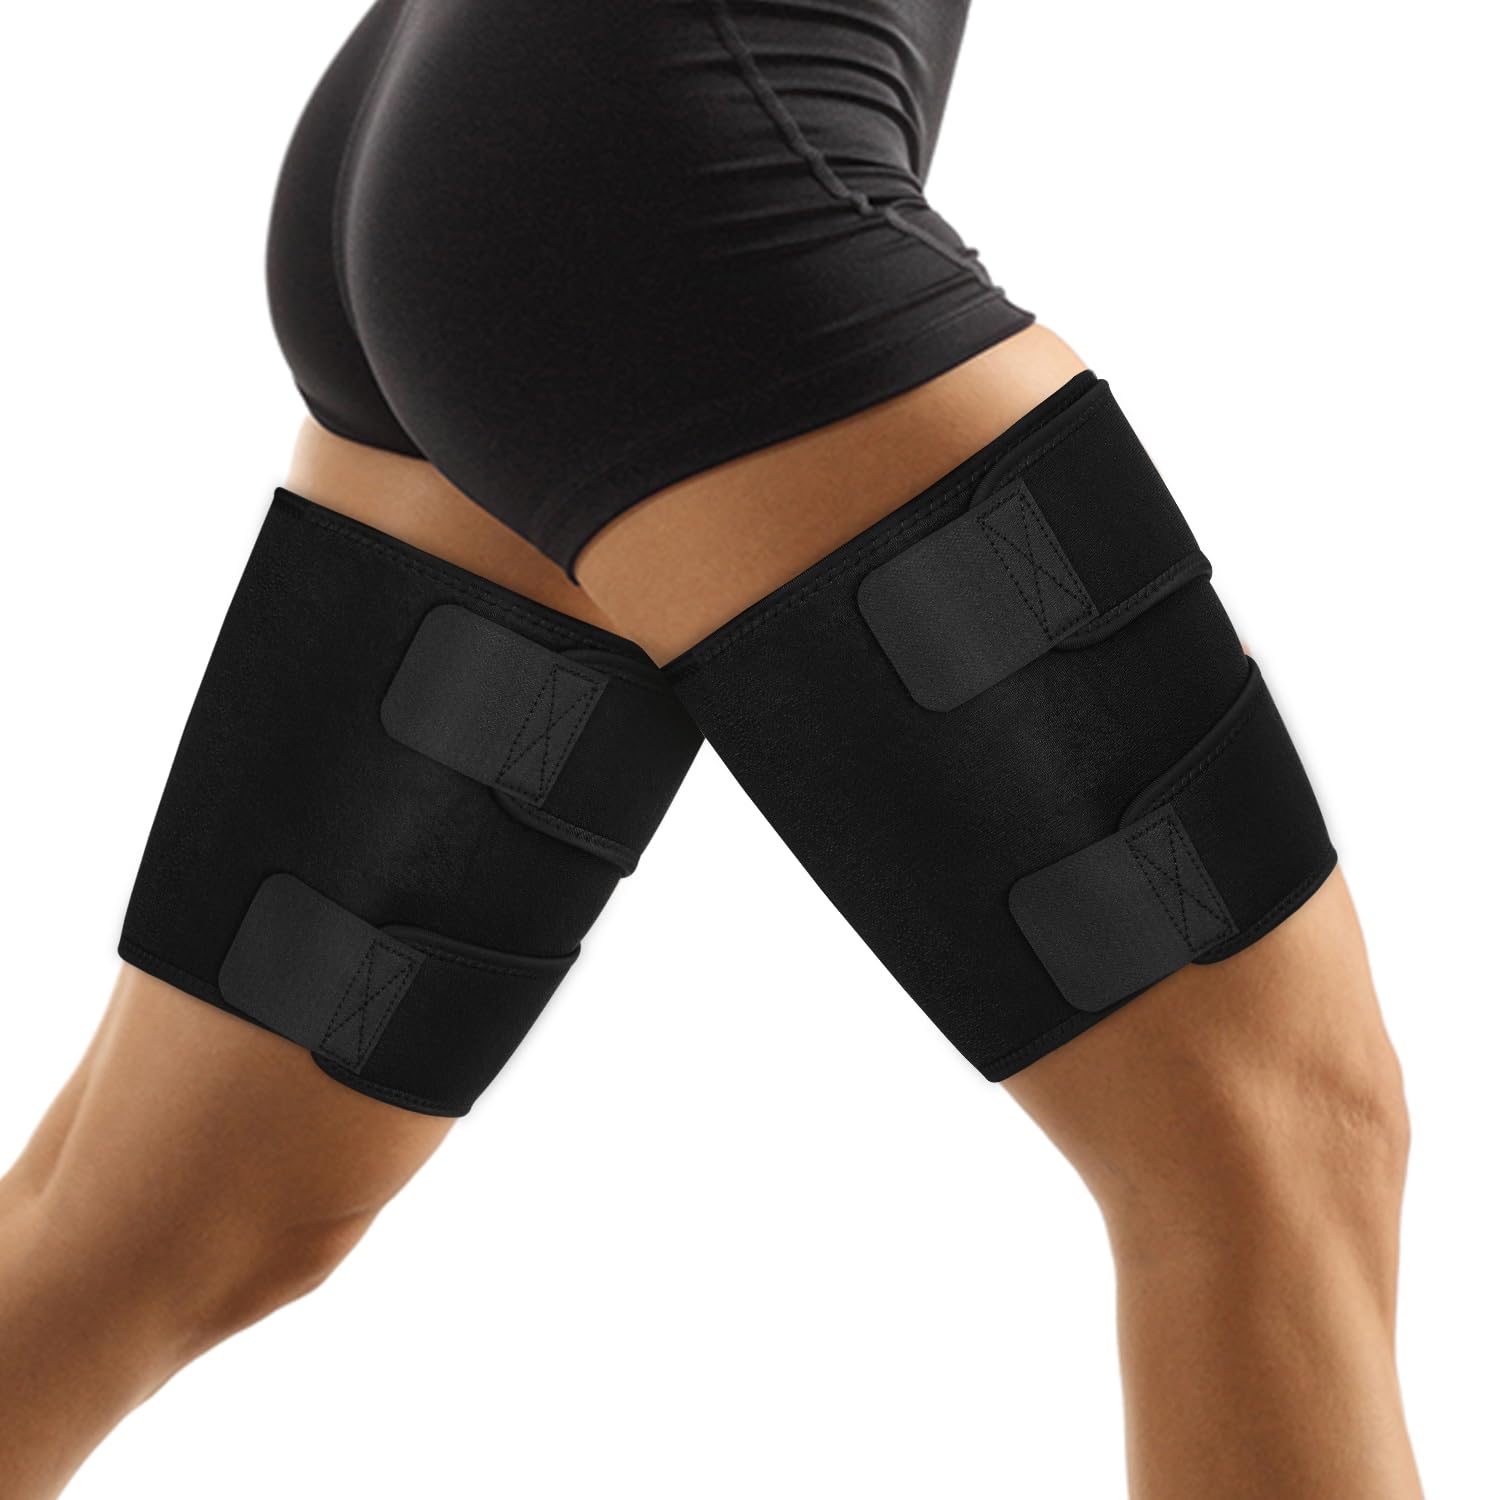 Thigh Wraps Support, M-XL